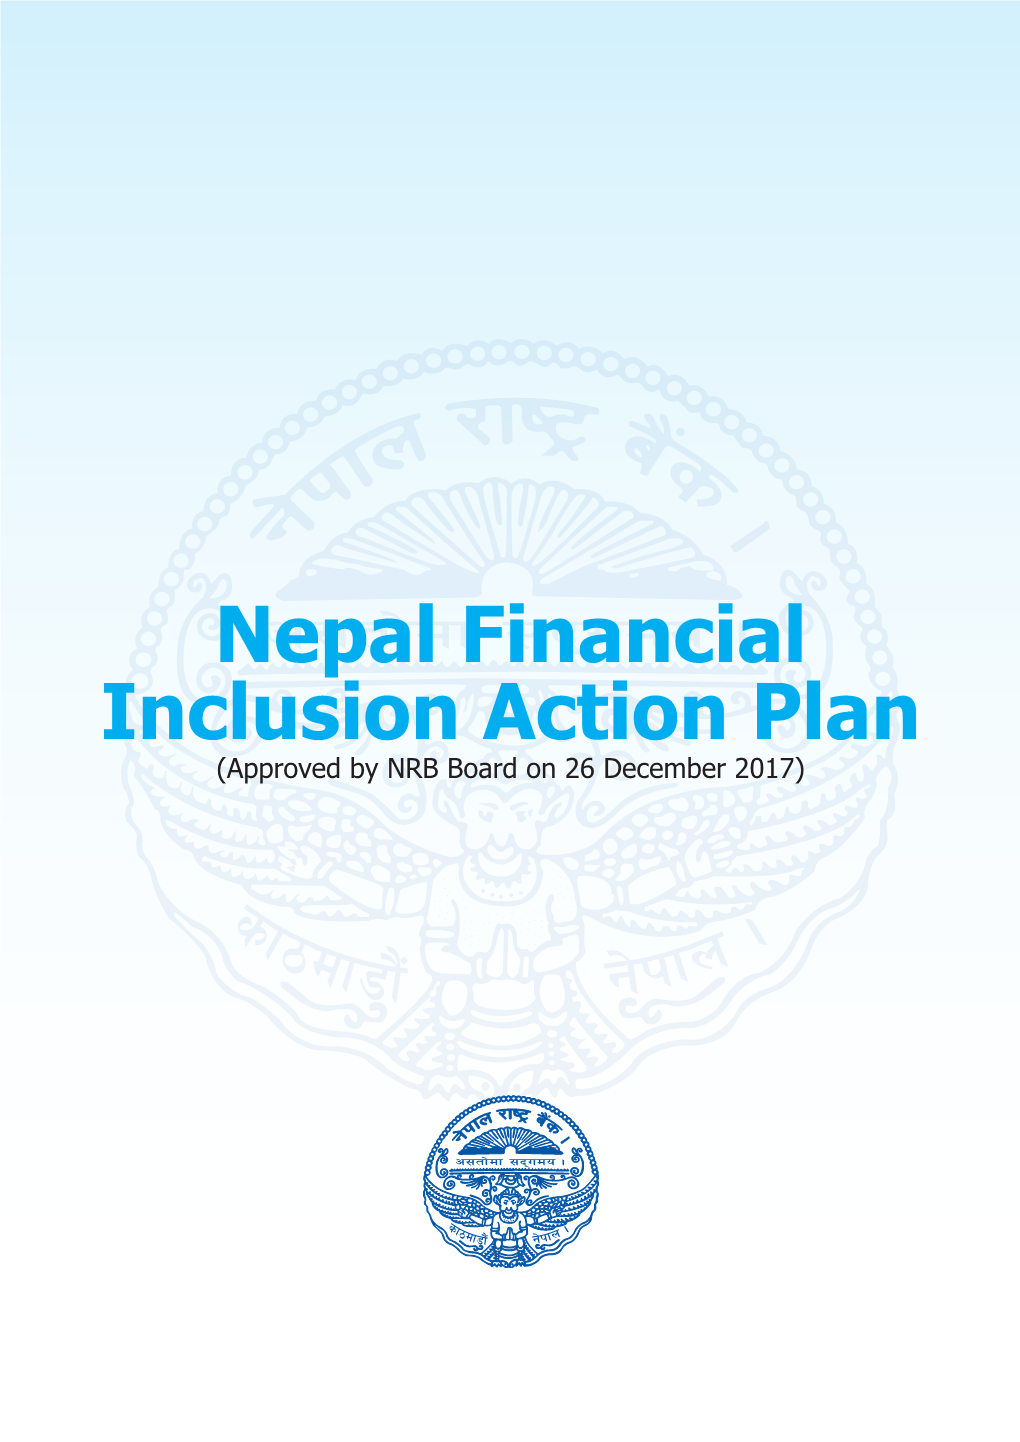 Nepal Financial Inclusion Action Plan (Approved by NRB Board on 26 December 2017) Nepal Financial Inclusion Action Plan (Approved by NRB Board on 26 December 2017)